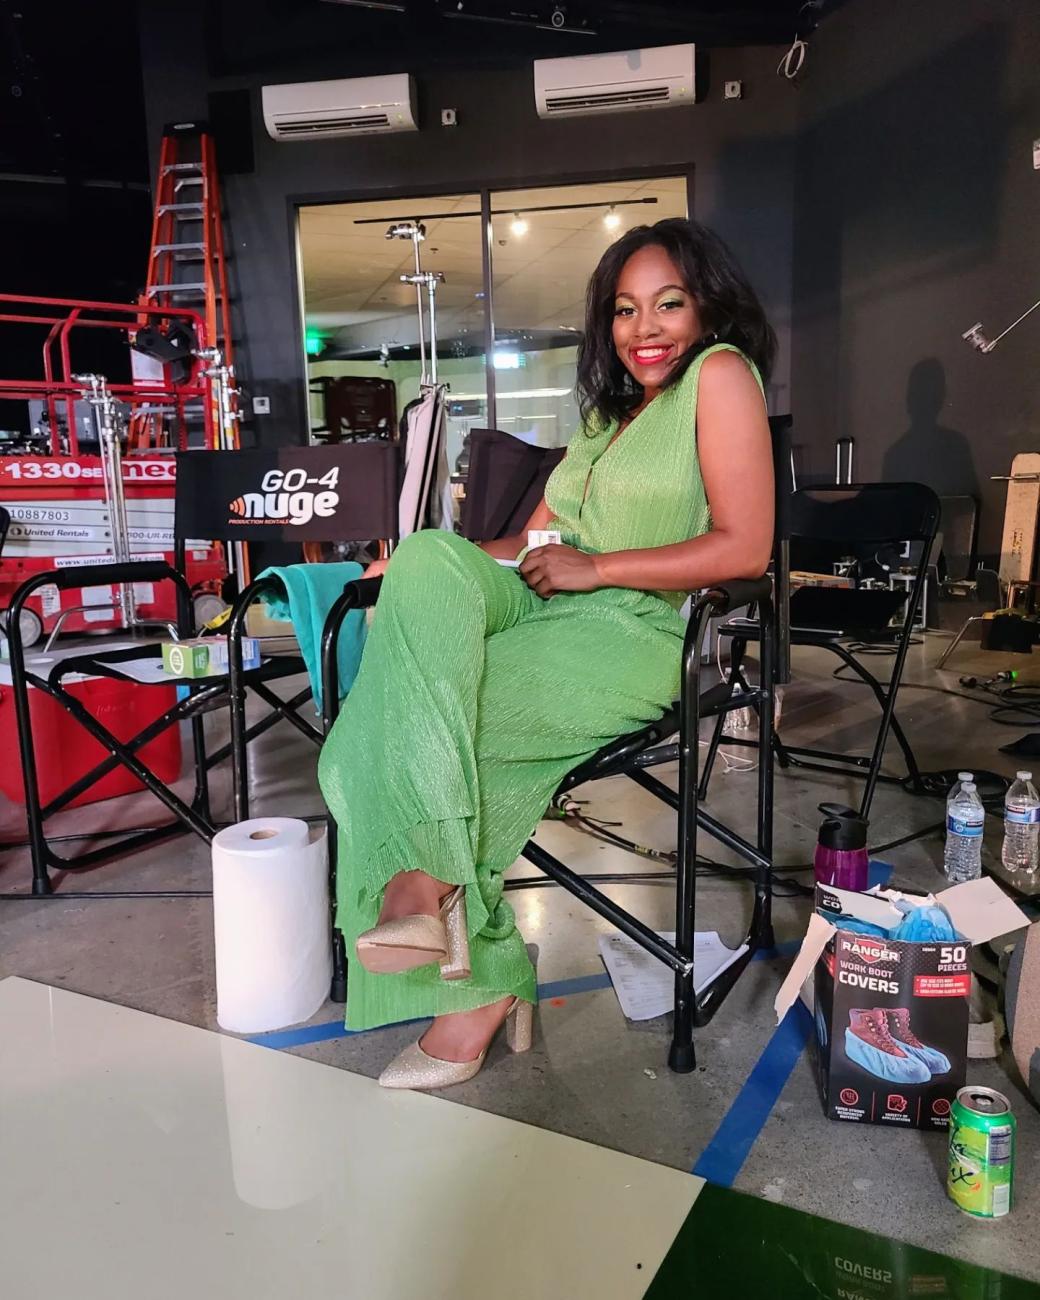 a dancer in a green outfit sits in a director's chair on a video production set